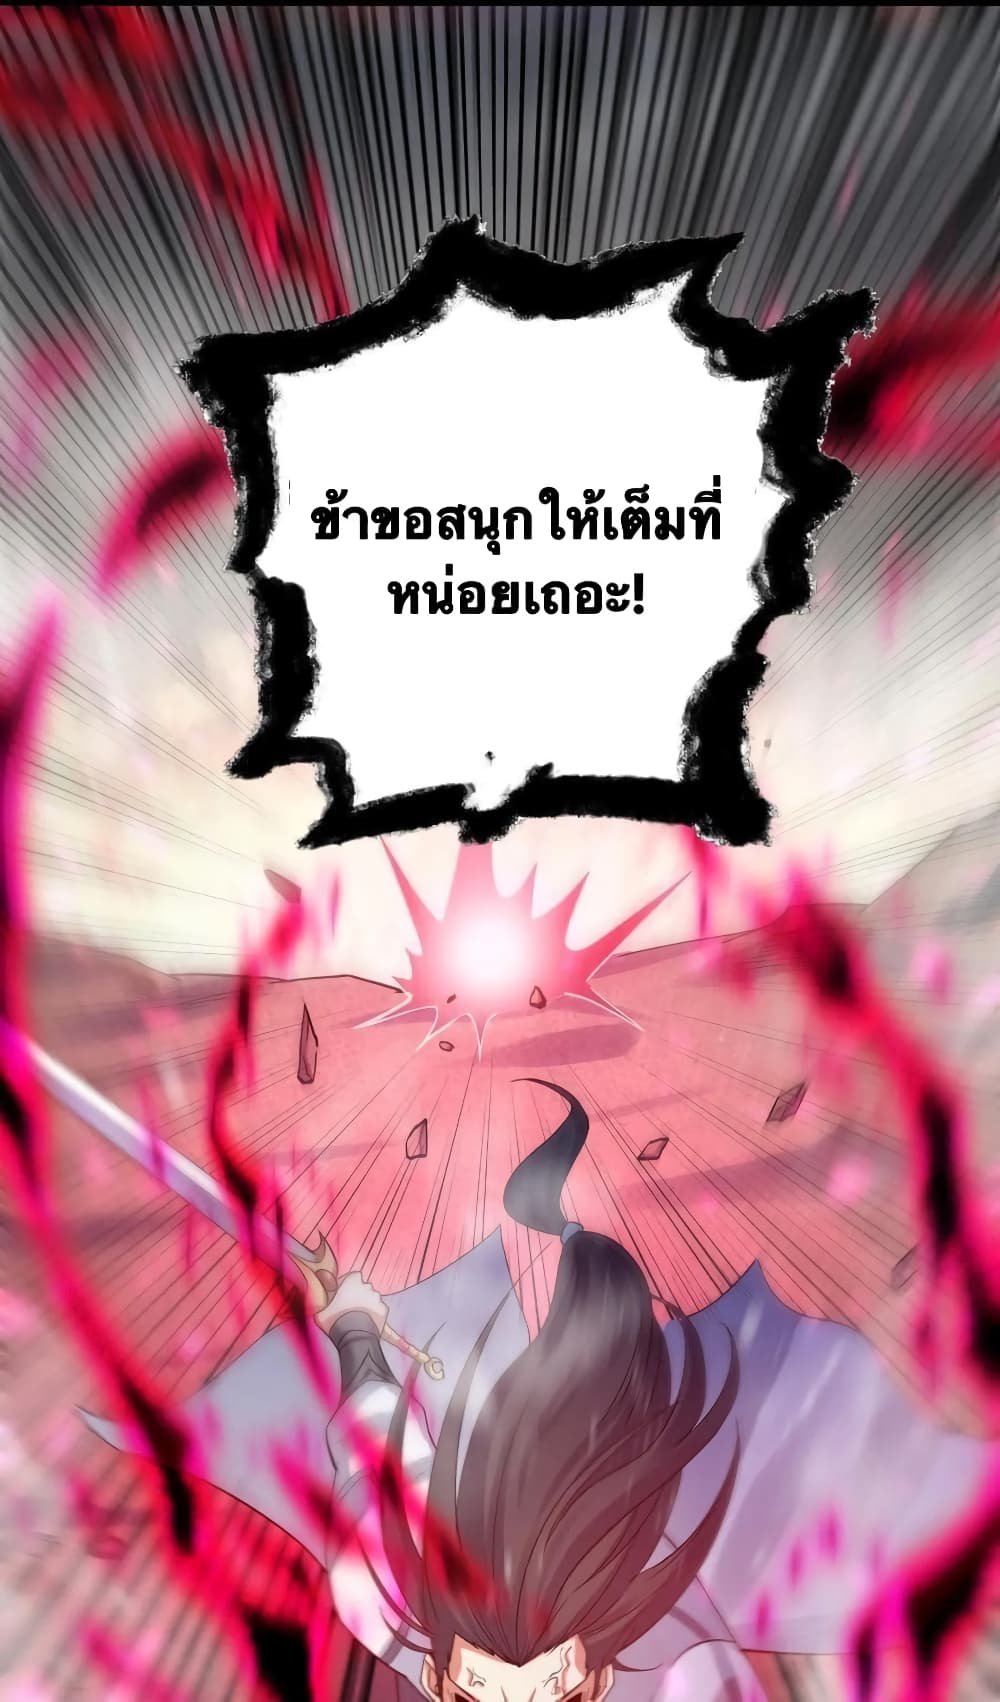 Godsian Masian from Another World ตอนที่ 89 (12)